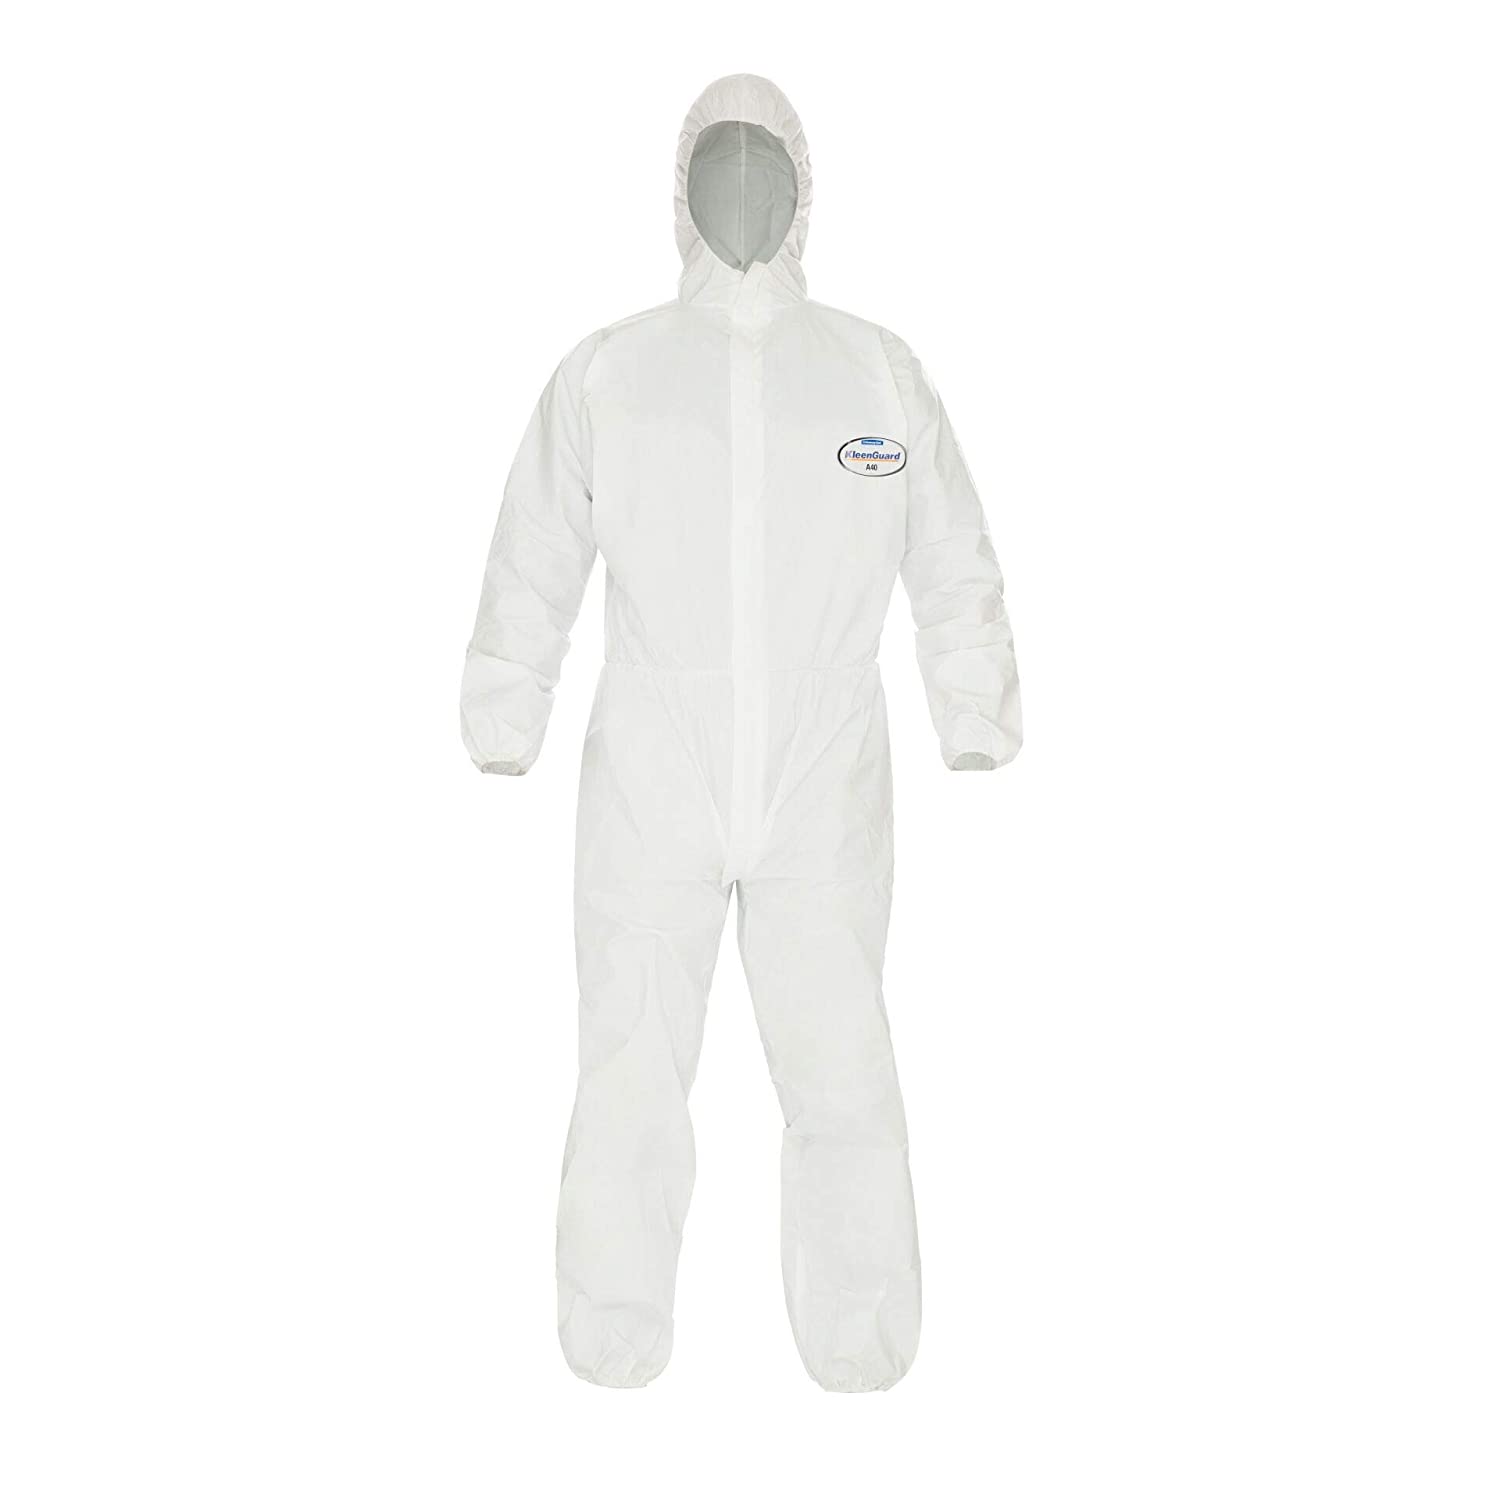 KLEENGUARD* A40 Liquid & Particle Protection Coveralls / Hooded / White, Sizes-M-99791, L-99792 (Pack of 25/Case, 1 Unit/Pack)